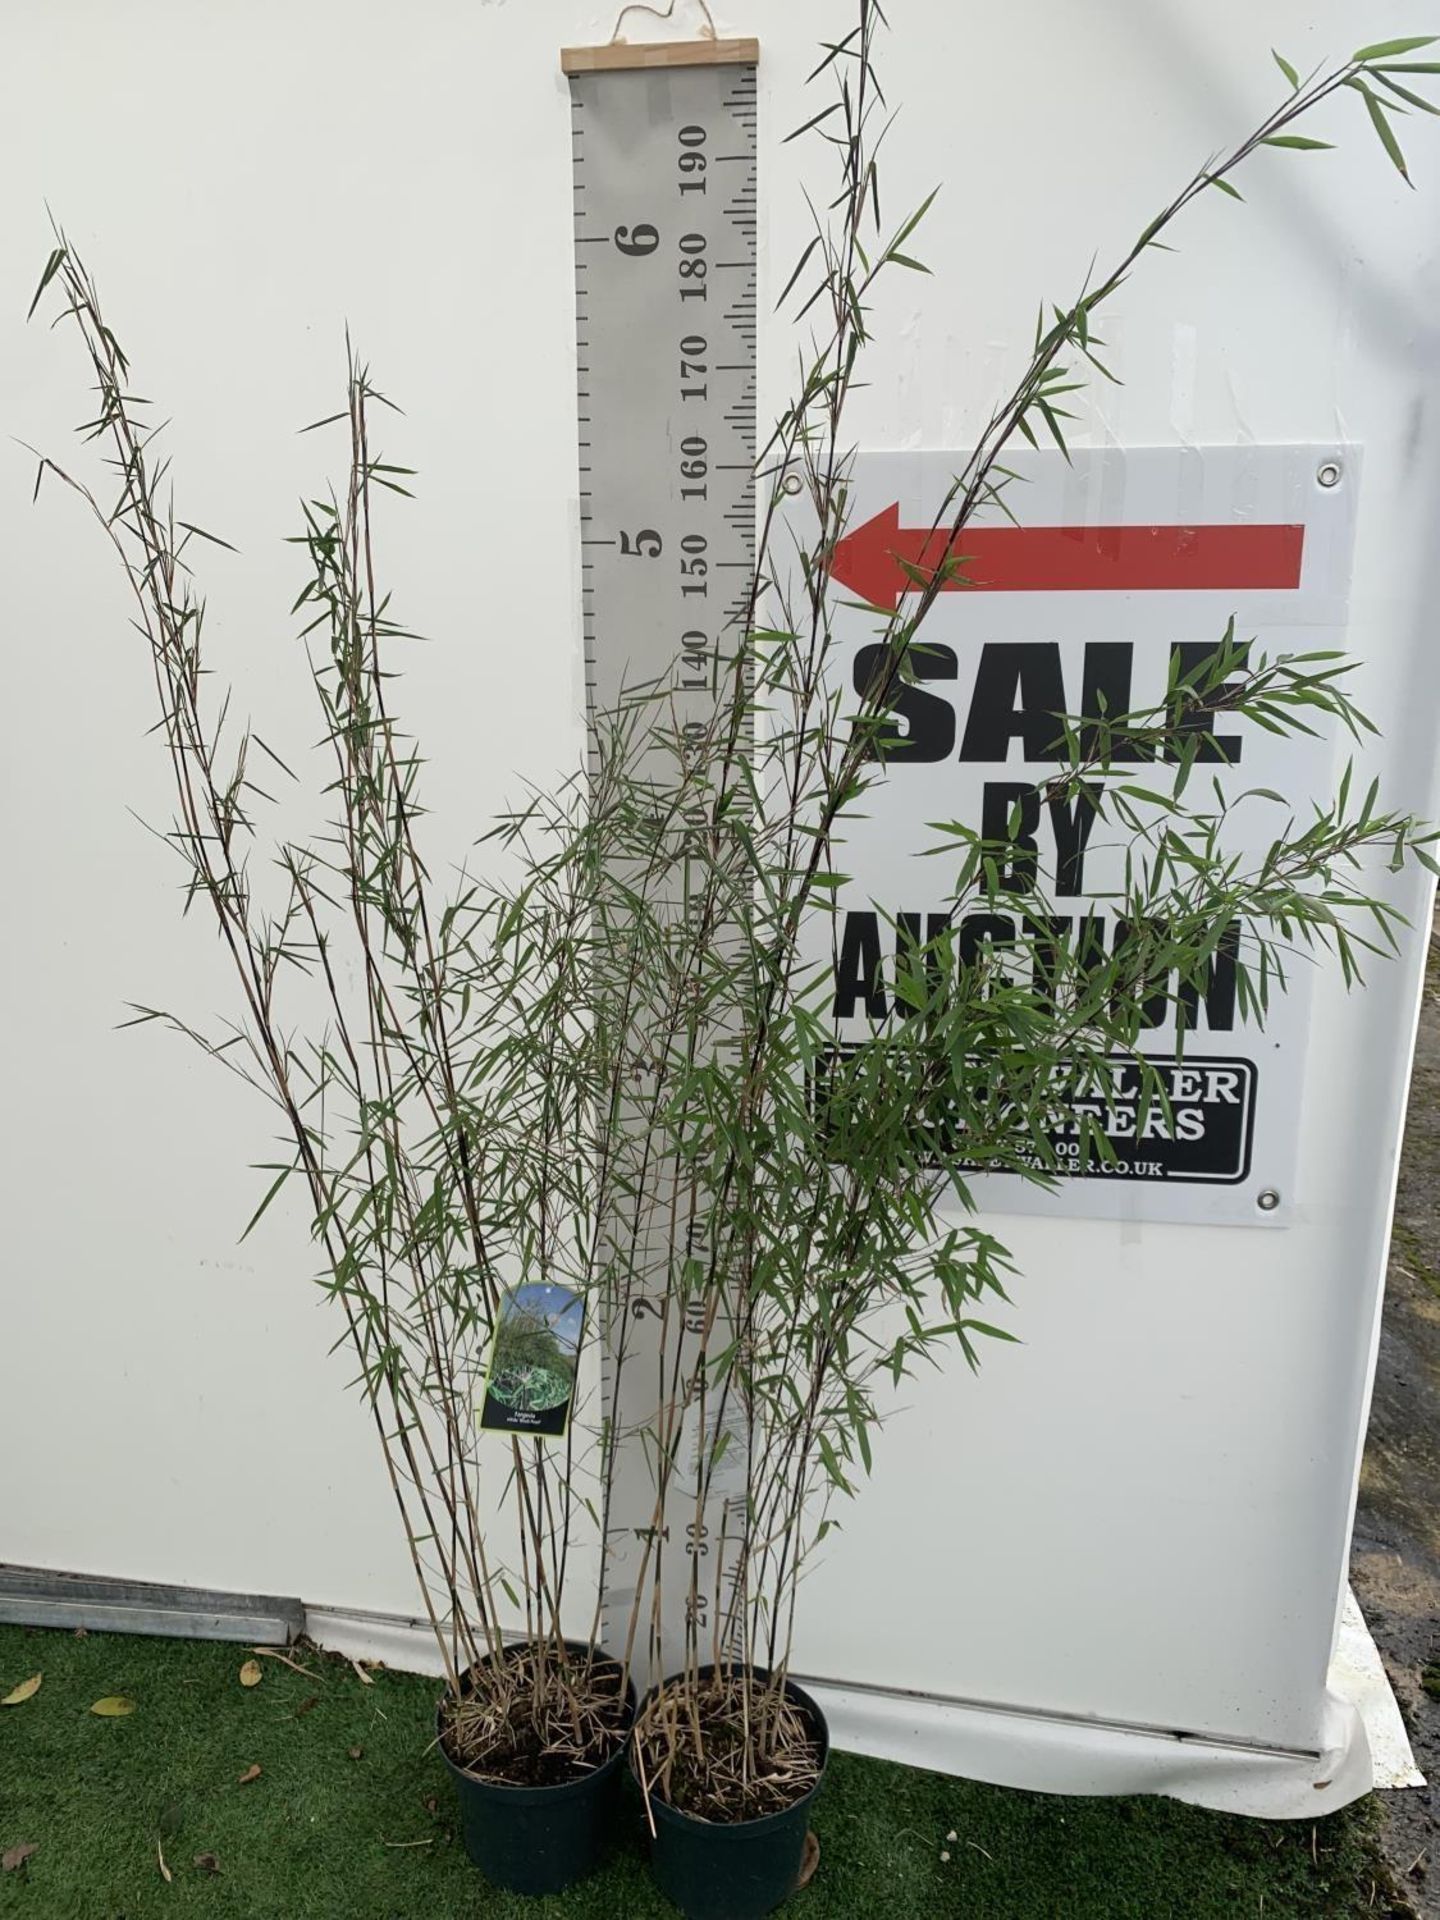 TWO BAMBOO FARGESIA NITIDA 'BLACK PEARL' APPROX 190CM IN HEIGHT IN 5 LTR POTS PLUS VAT TO BE SOLD - Image 3 of 10